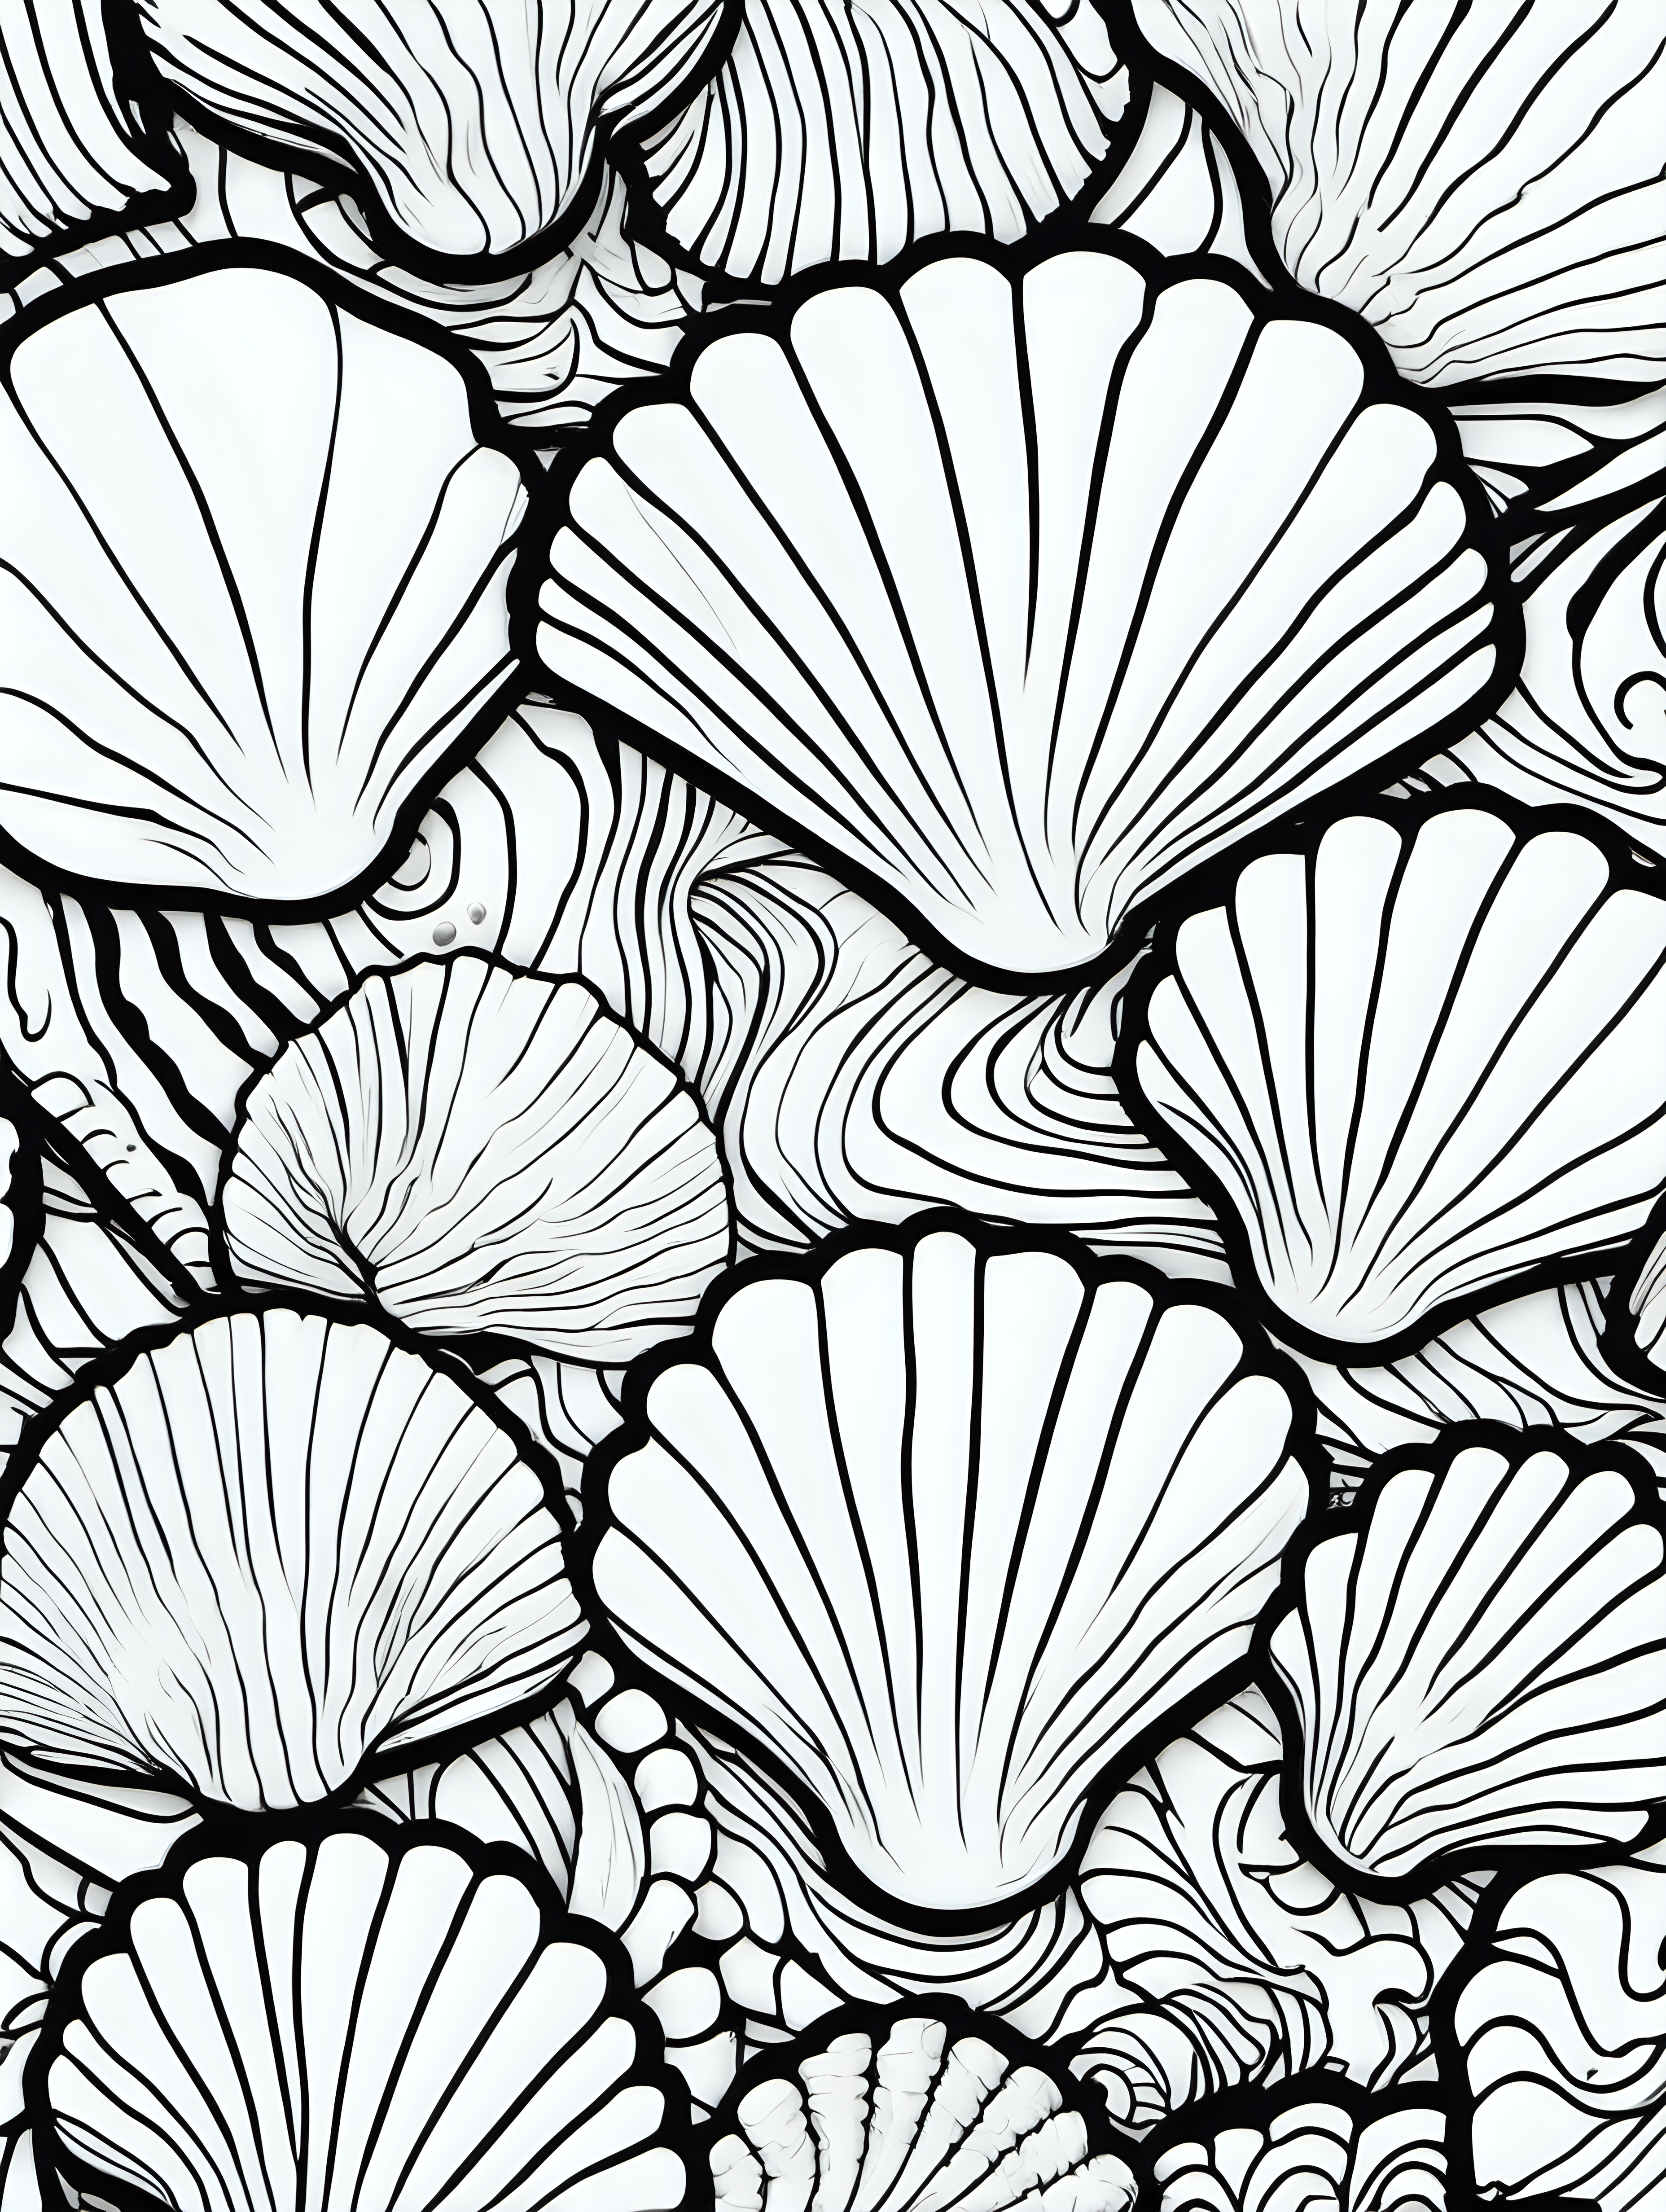 seashells abstract coloring page simple draw no colors